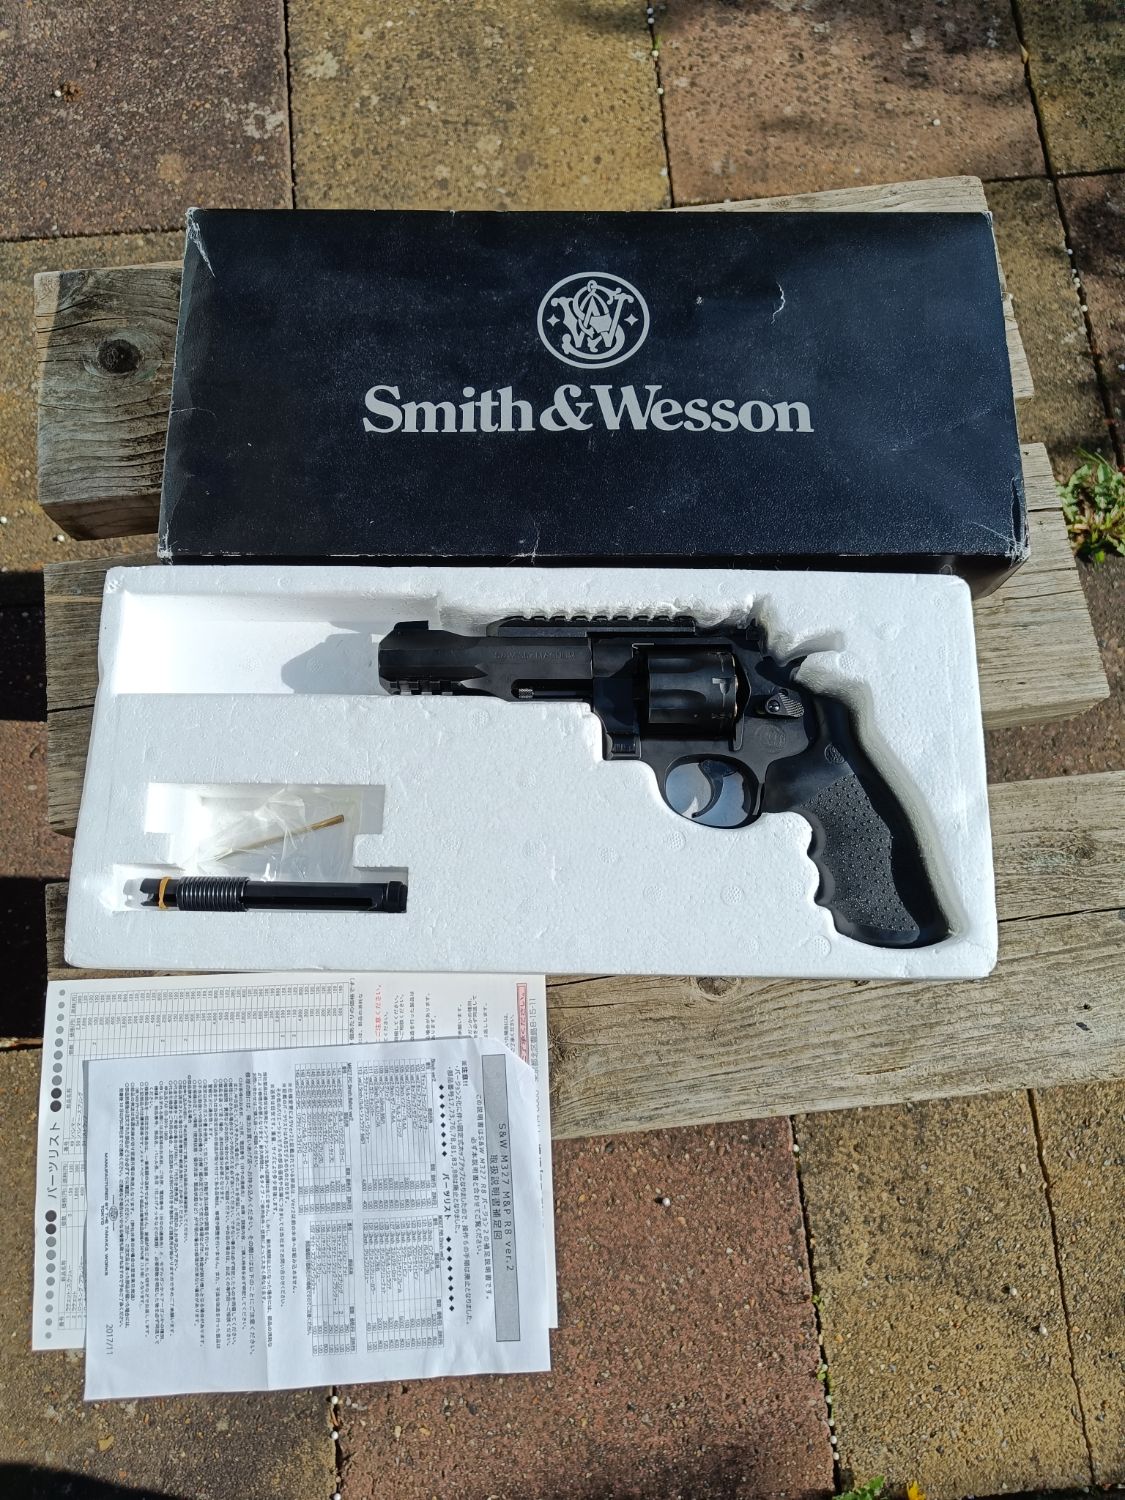 Tanaka Smith & Wesson 327 M&P R8 - Gas Pistols - Airsoft Forums UK